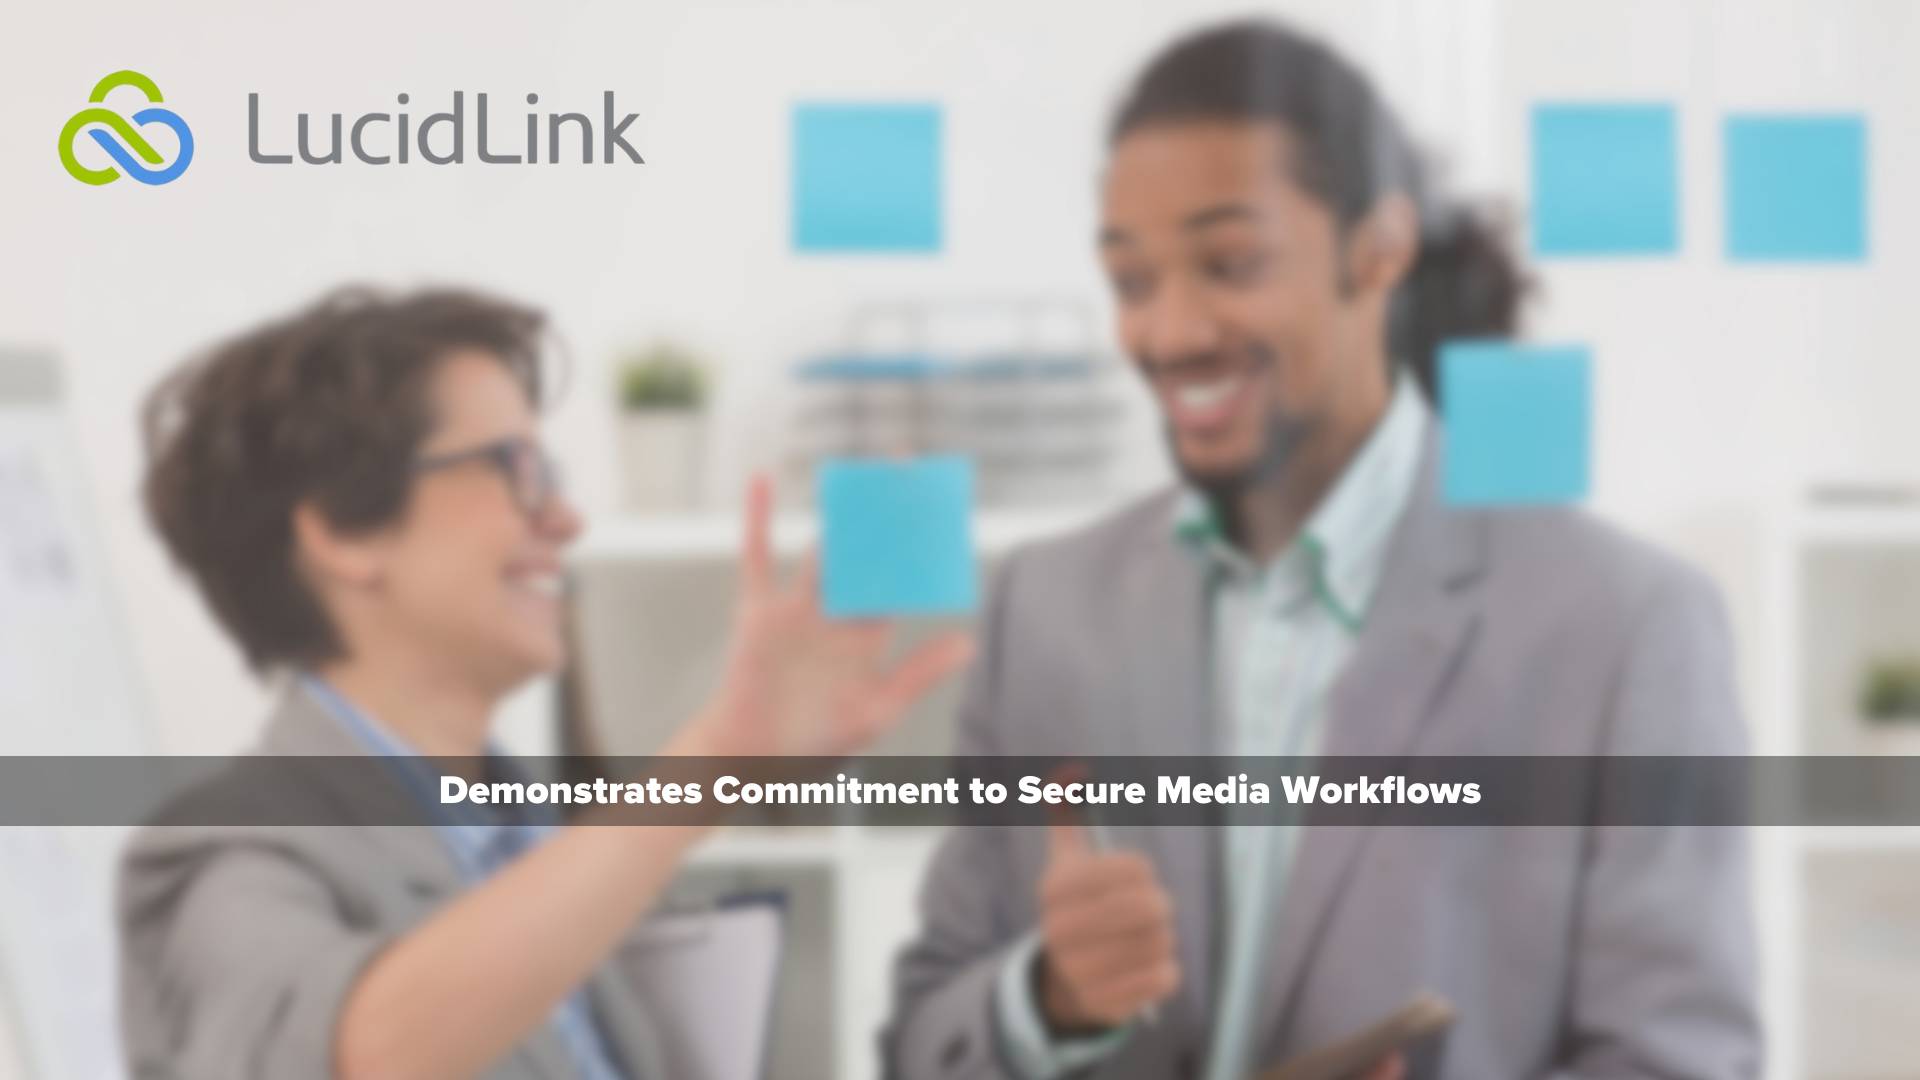 LucidLink Demonstrates Commitment to Secure Media Workflows